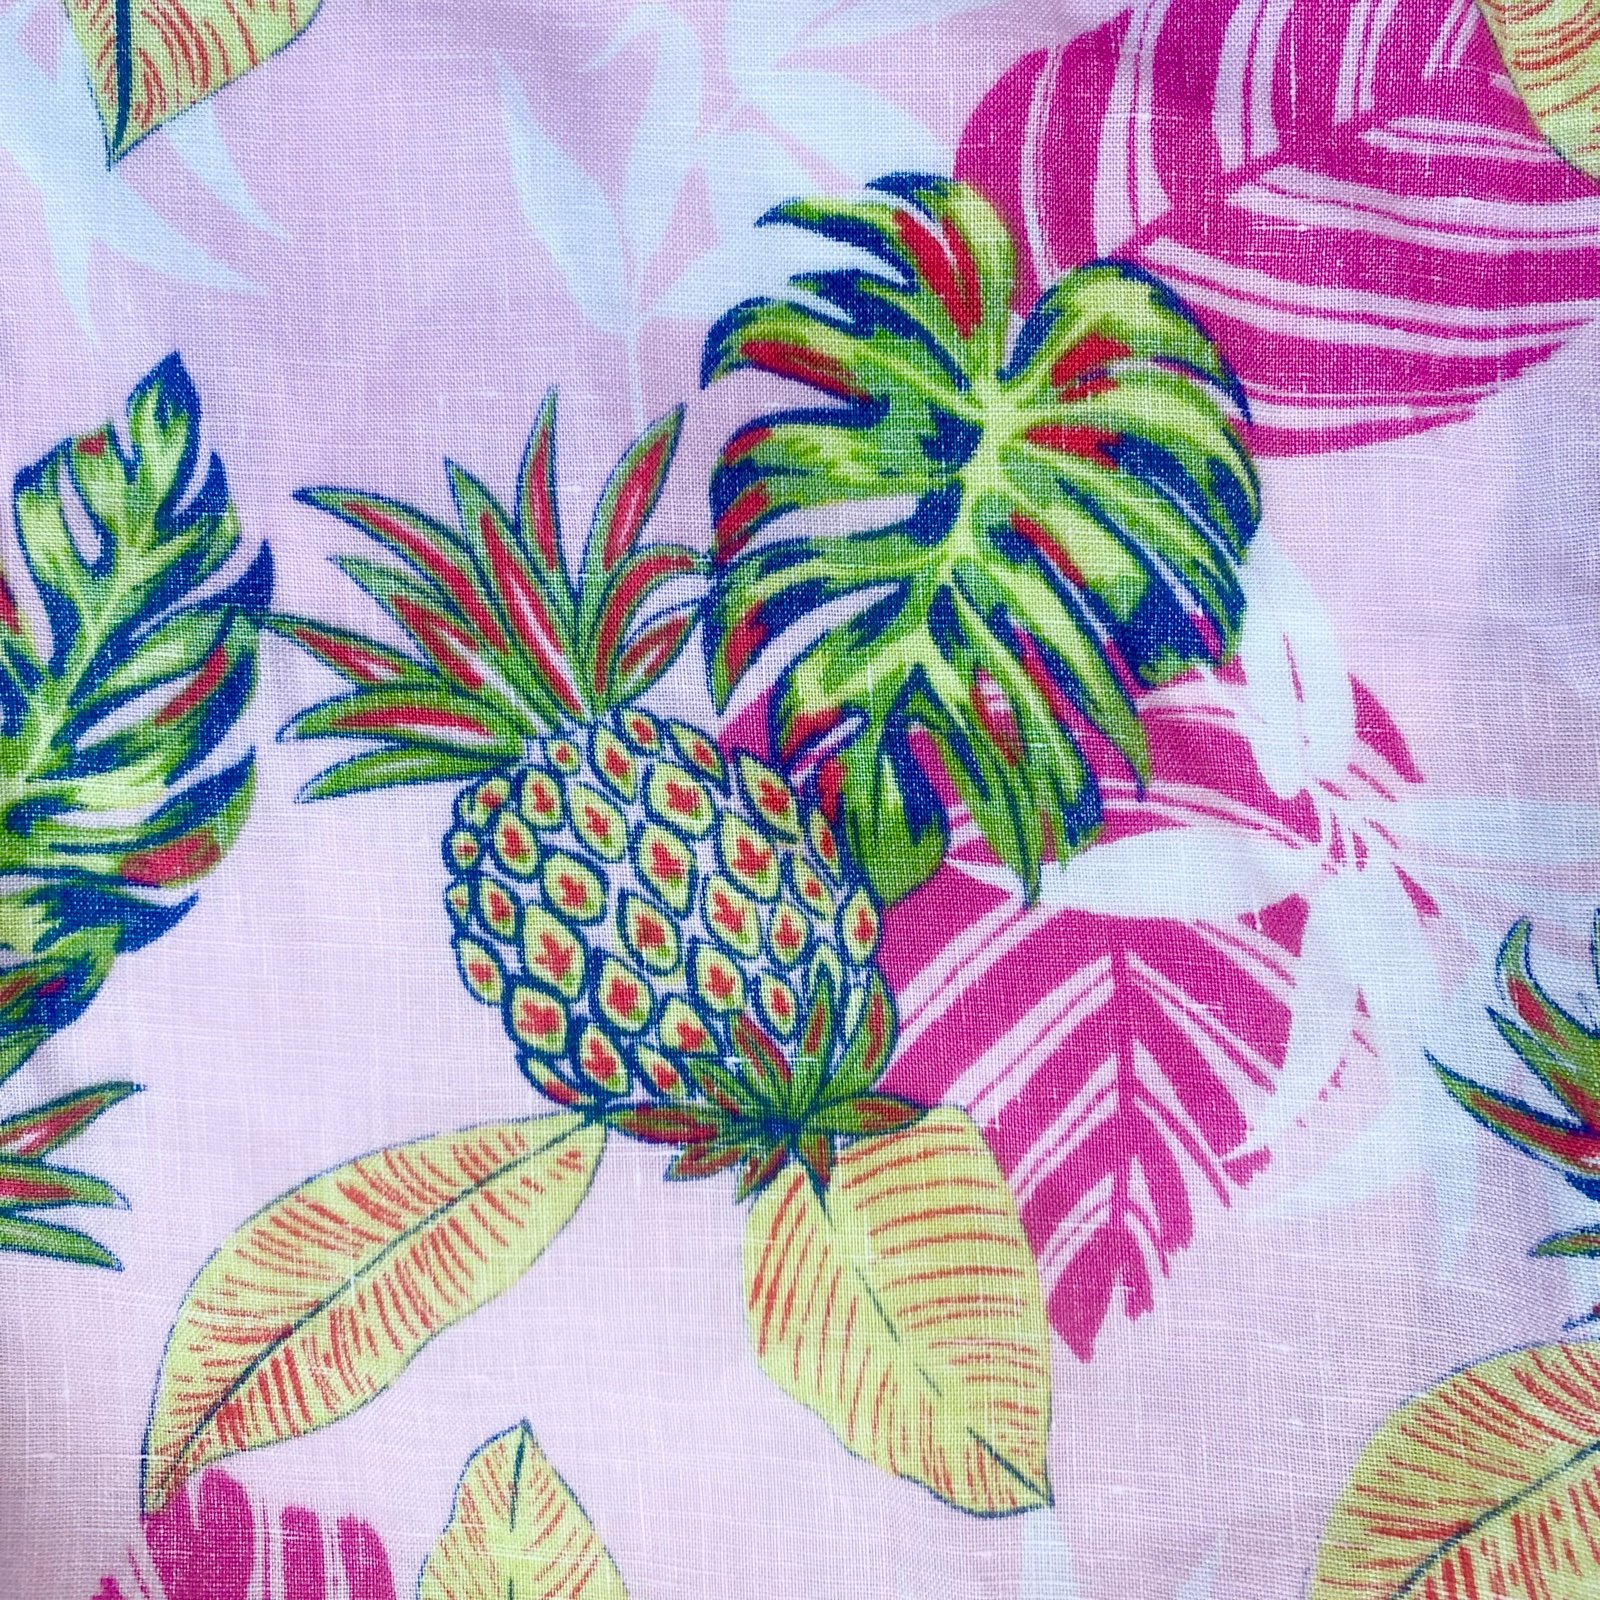 Gorgeous Tommy Bahama Crisp Linen Pink Pineapple Tropical Print Long Sleeve Shirt Top MlnTCum9o Everyday Low Prices